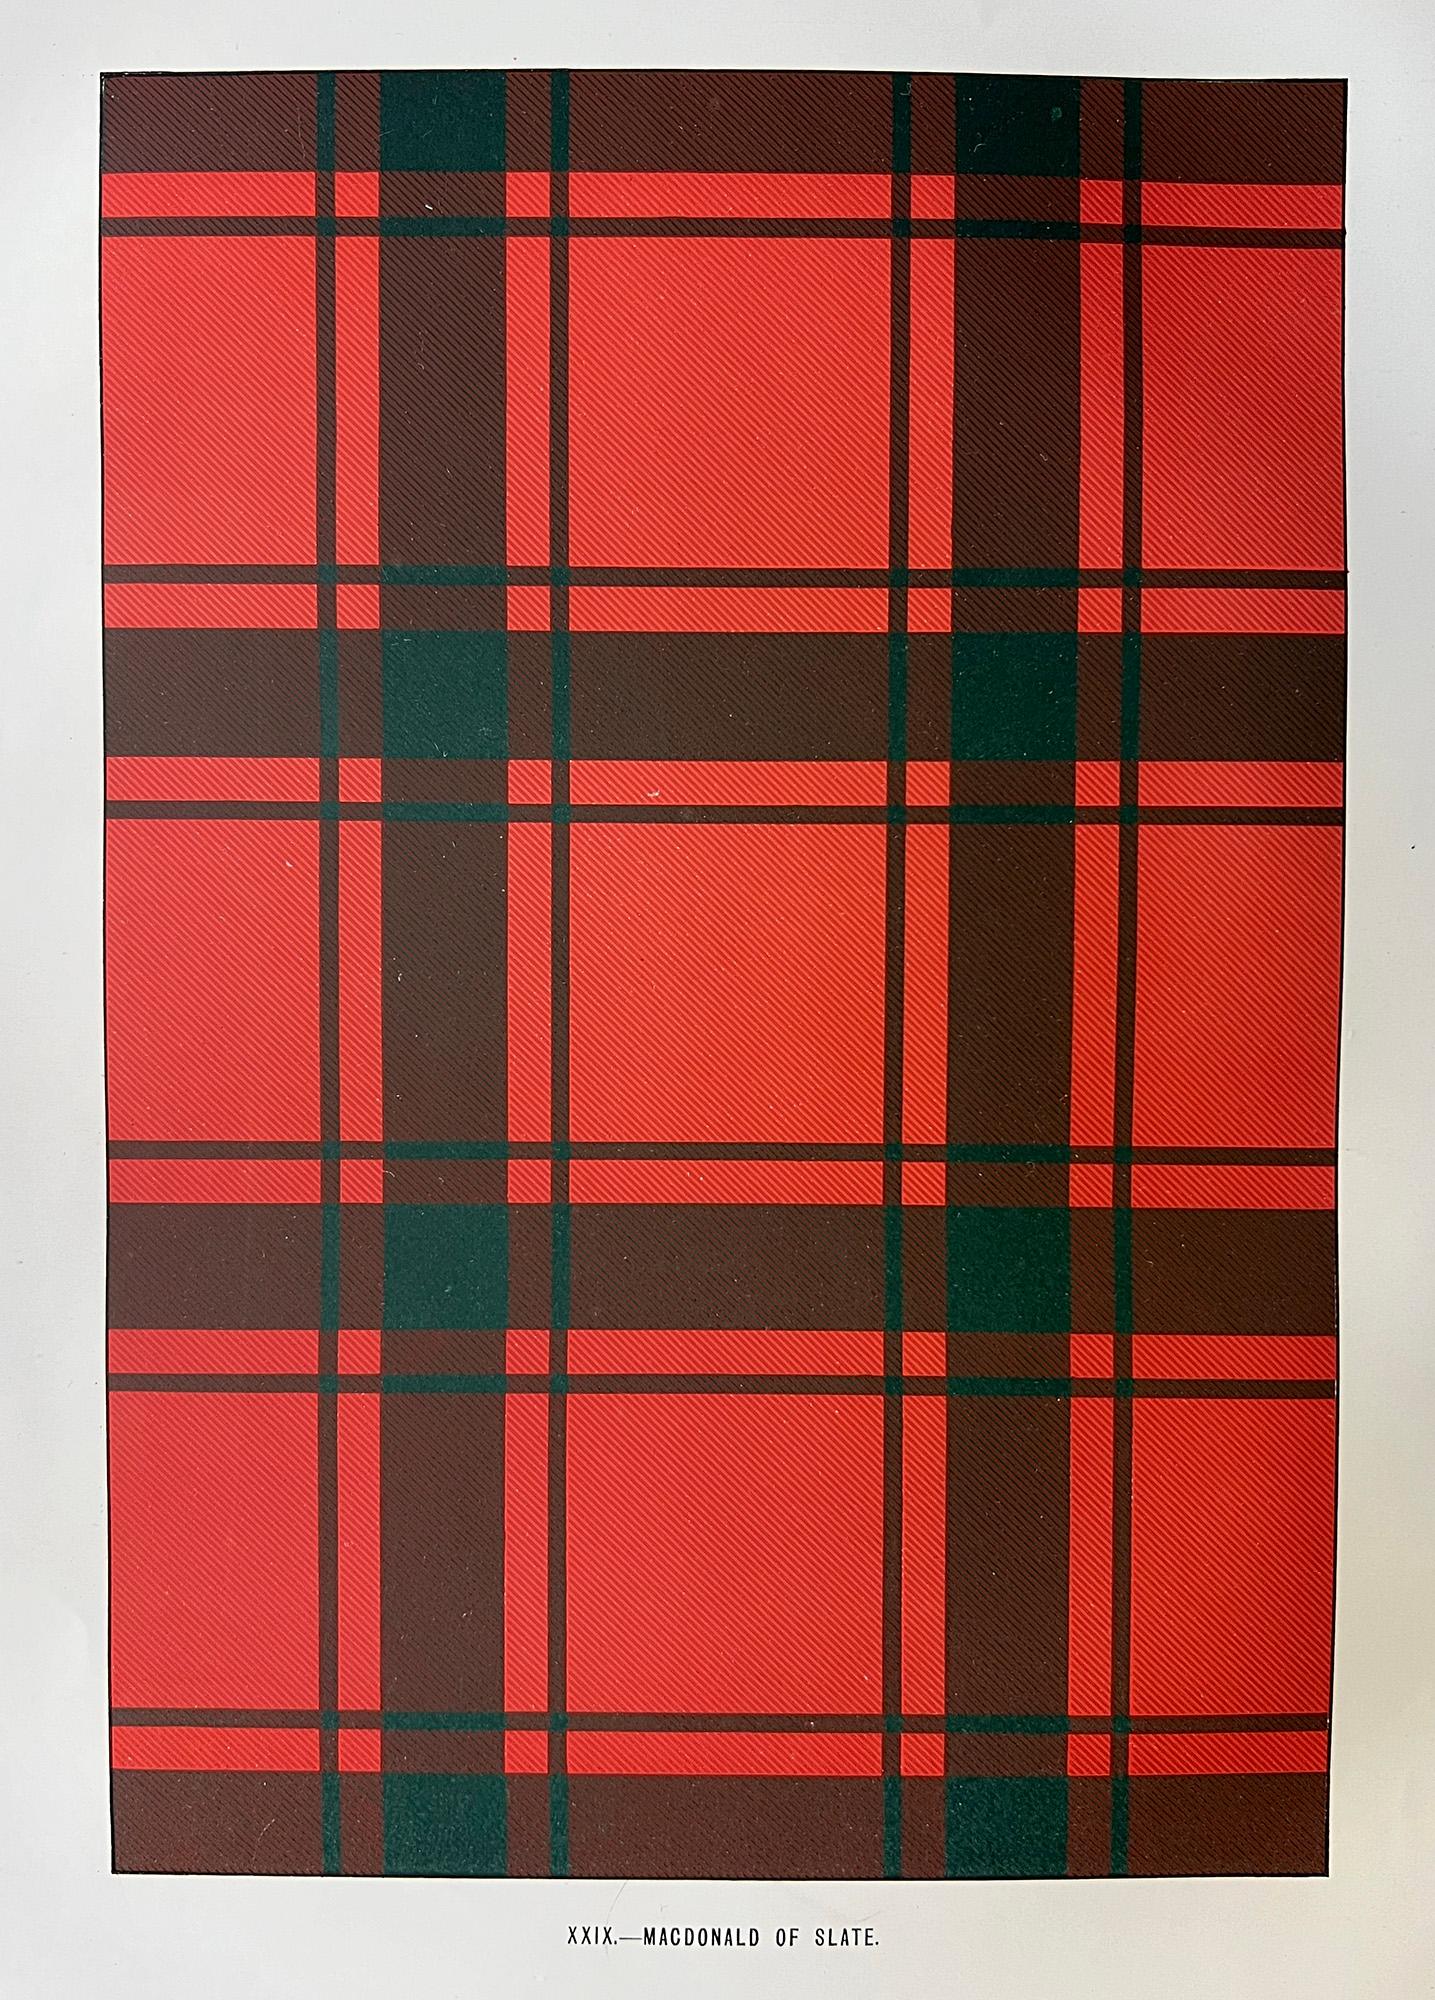 Unknown Interior Print – MacDonald of the Isles and Slate (Tartan), Schottland Kunst Design Lithographie Druck